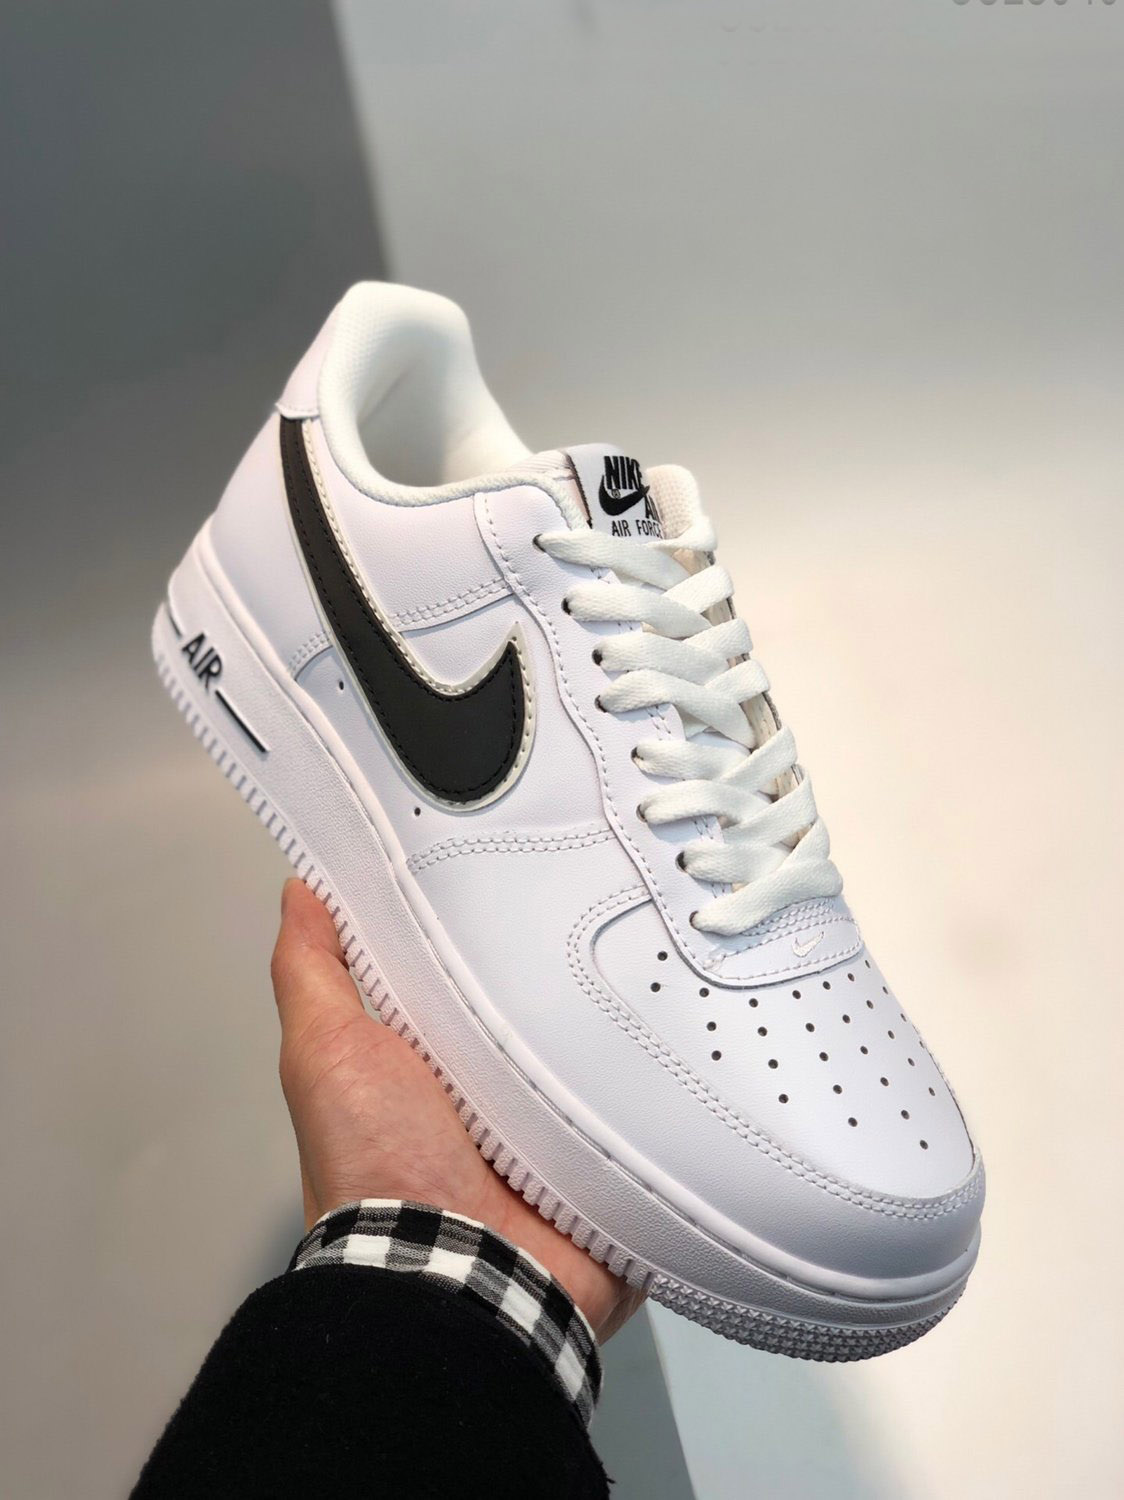 Nike Air Force 1 07 3 White Black For Sale – Sneaker Hello